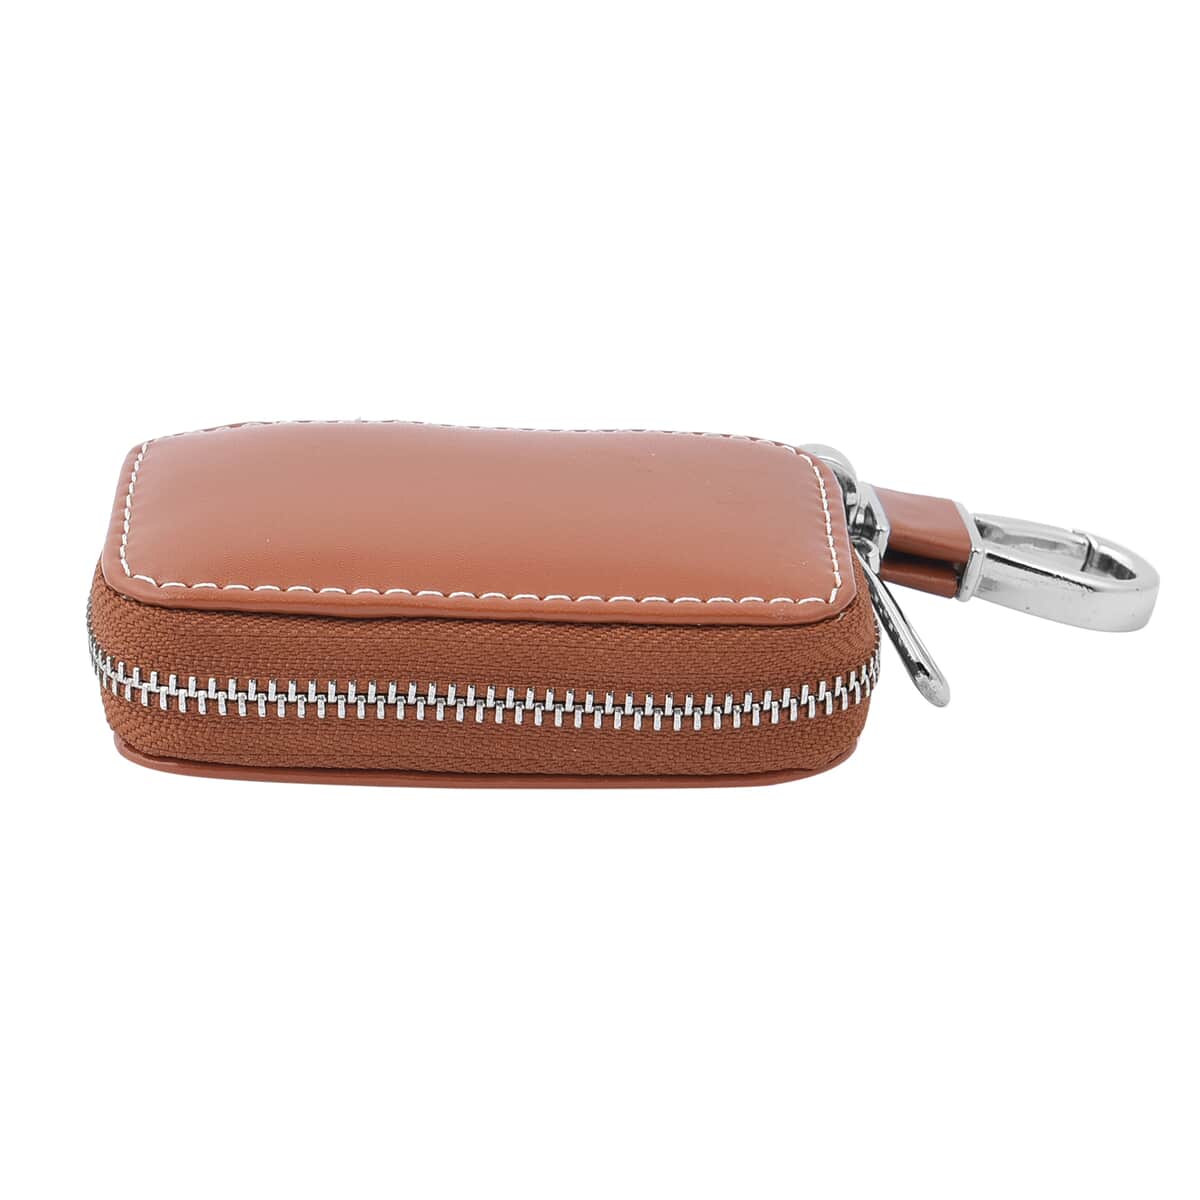 Brown Square-Shaped Genuine Leather Bag With Swivel Metallic Snap Hoop, Zipper Closure, and Key-ring For Car Keys, Remote image number 0